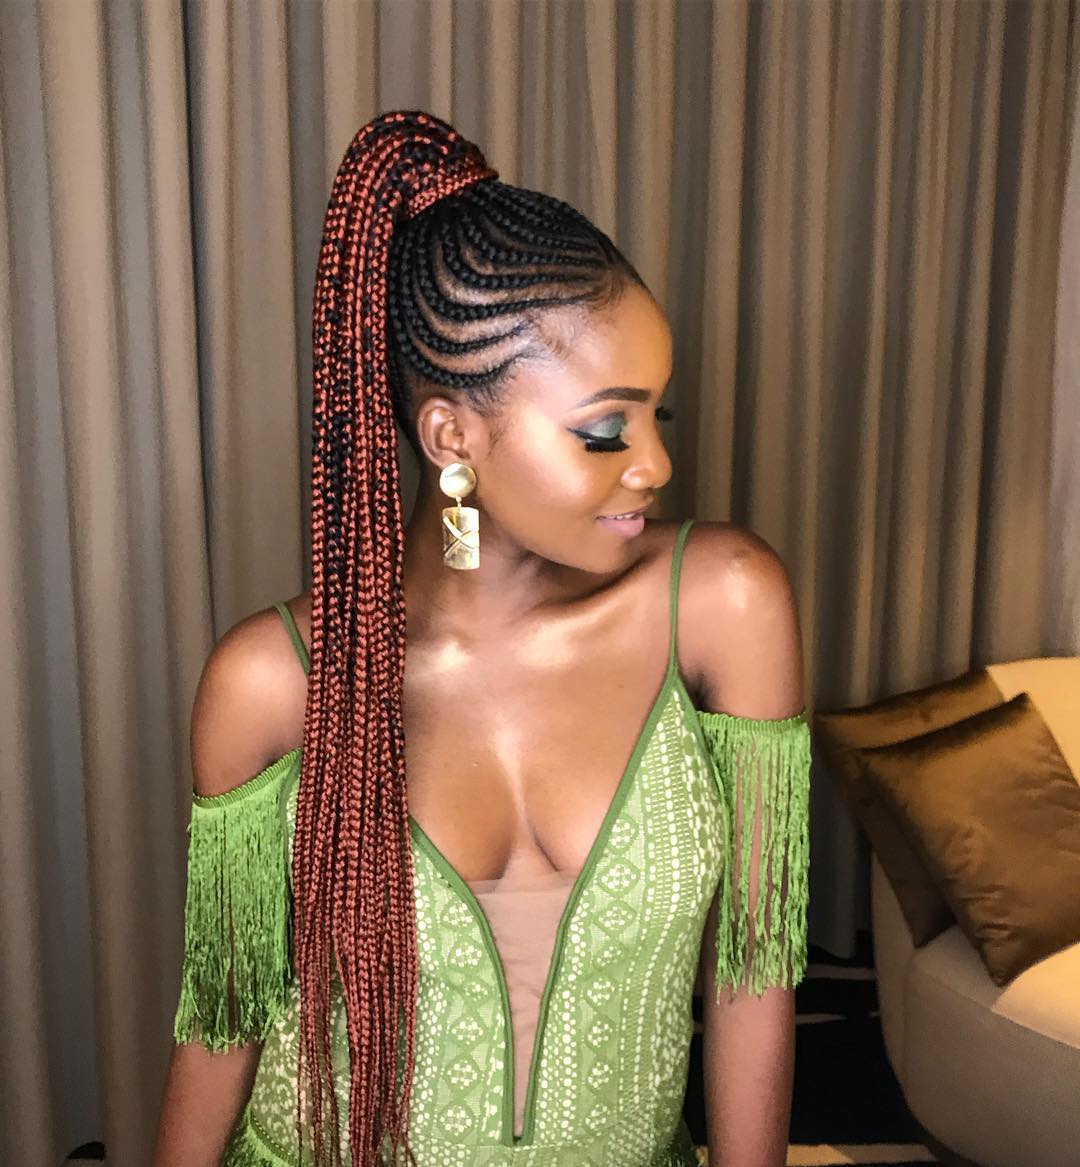 Simi Looking All Gorgeous In Green (Photos)